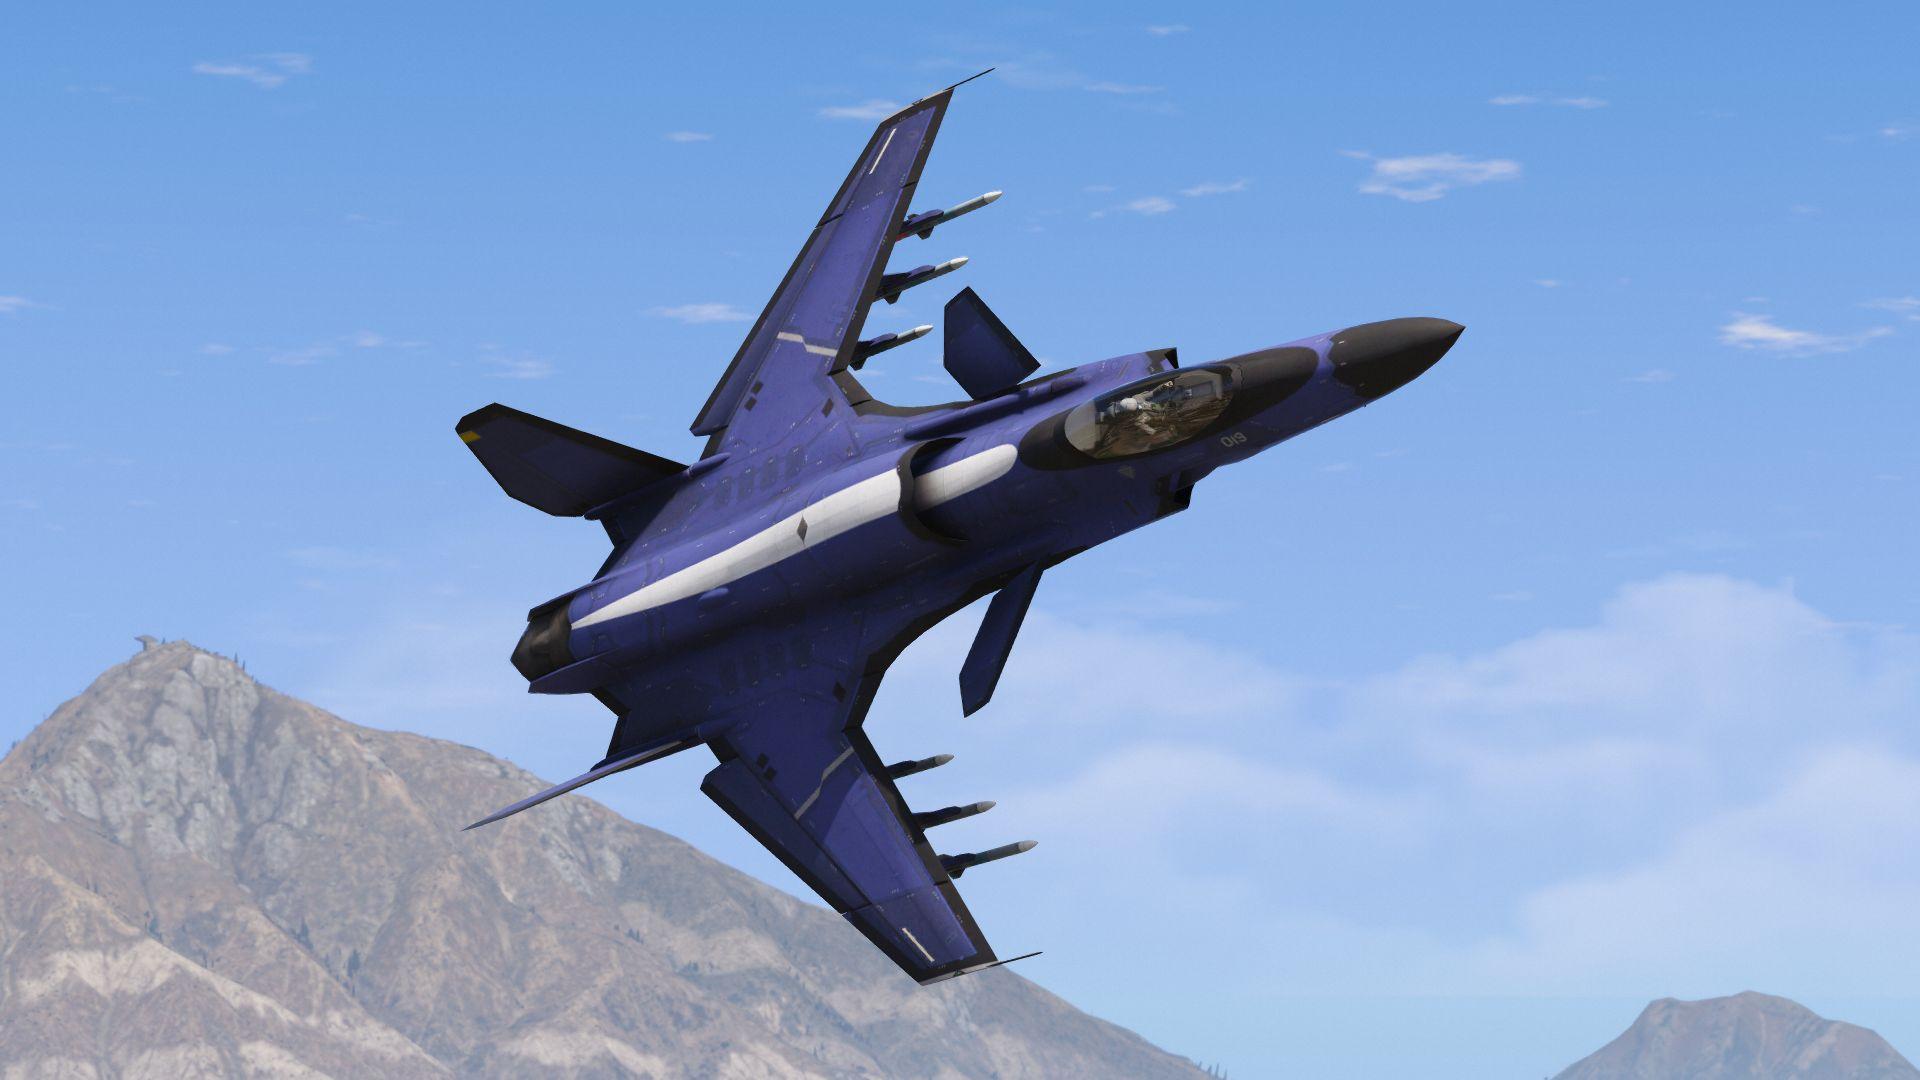 ASF-X Shinden II (Ace Combat) [Add-On]